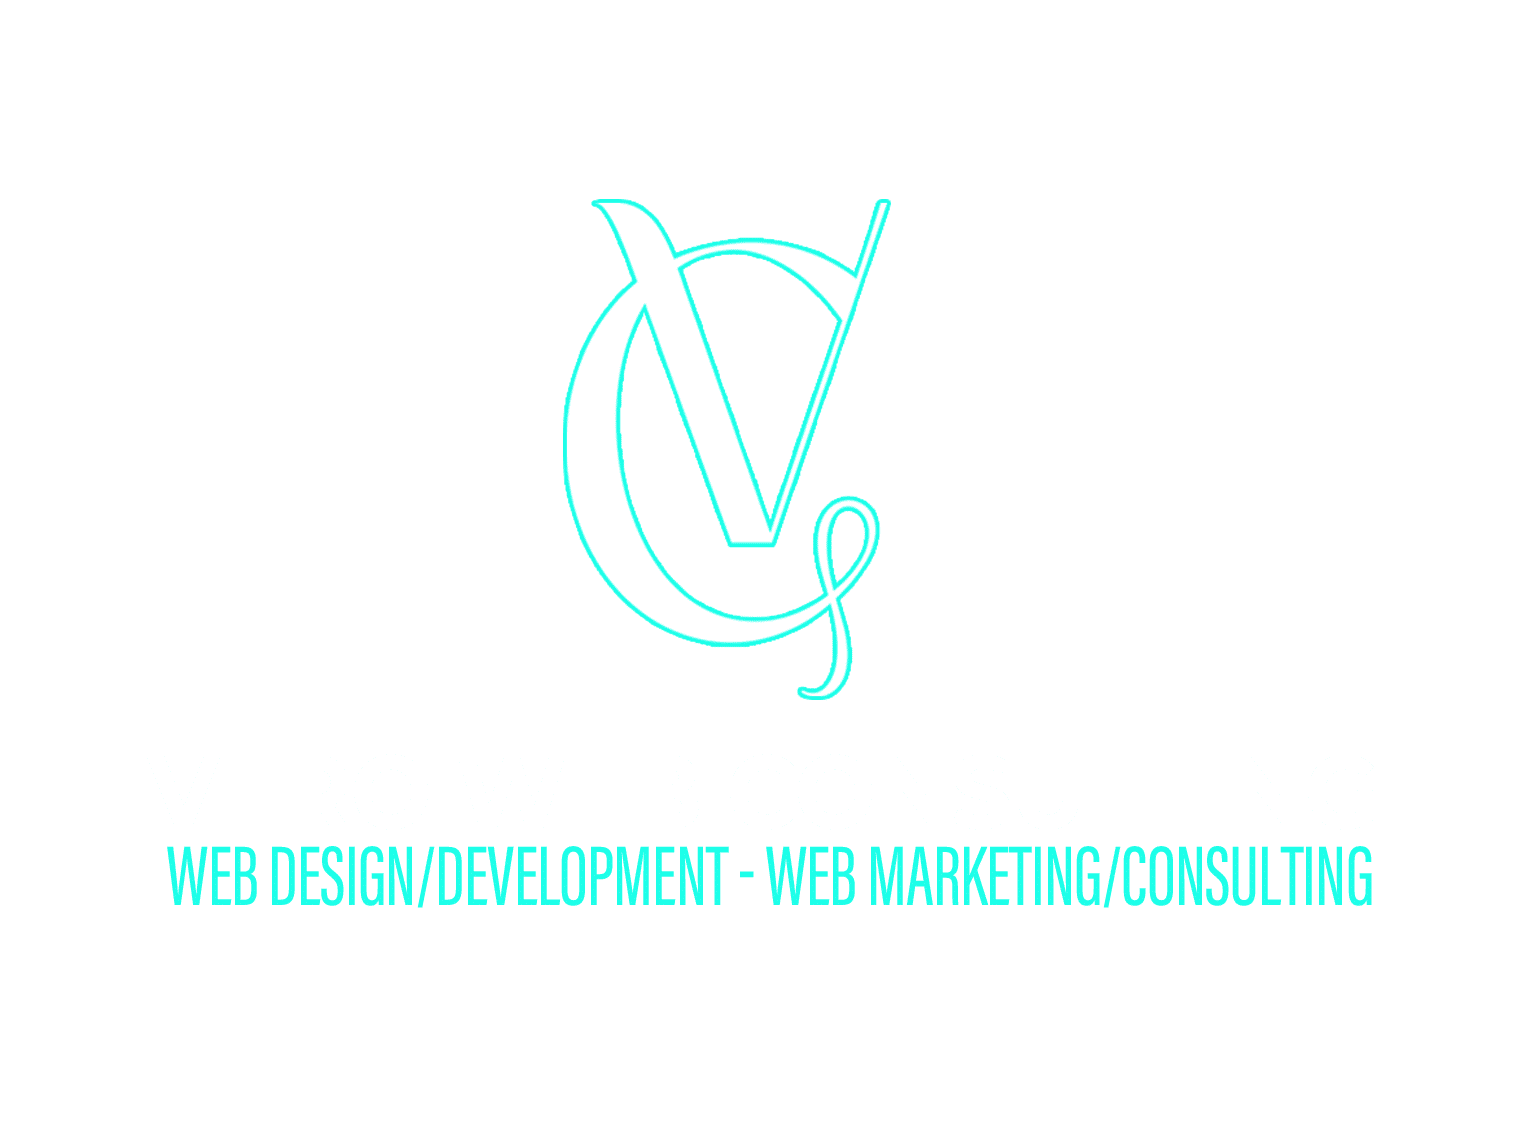 Vero Web Consulting, female-owned and operated web development, web marketing and consulting firm in vero beach, florida.